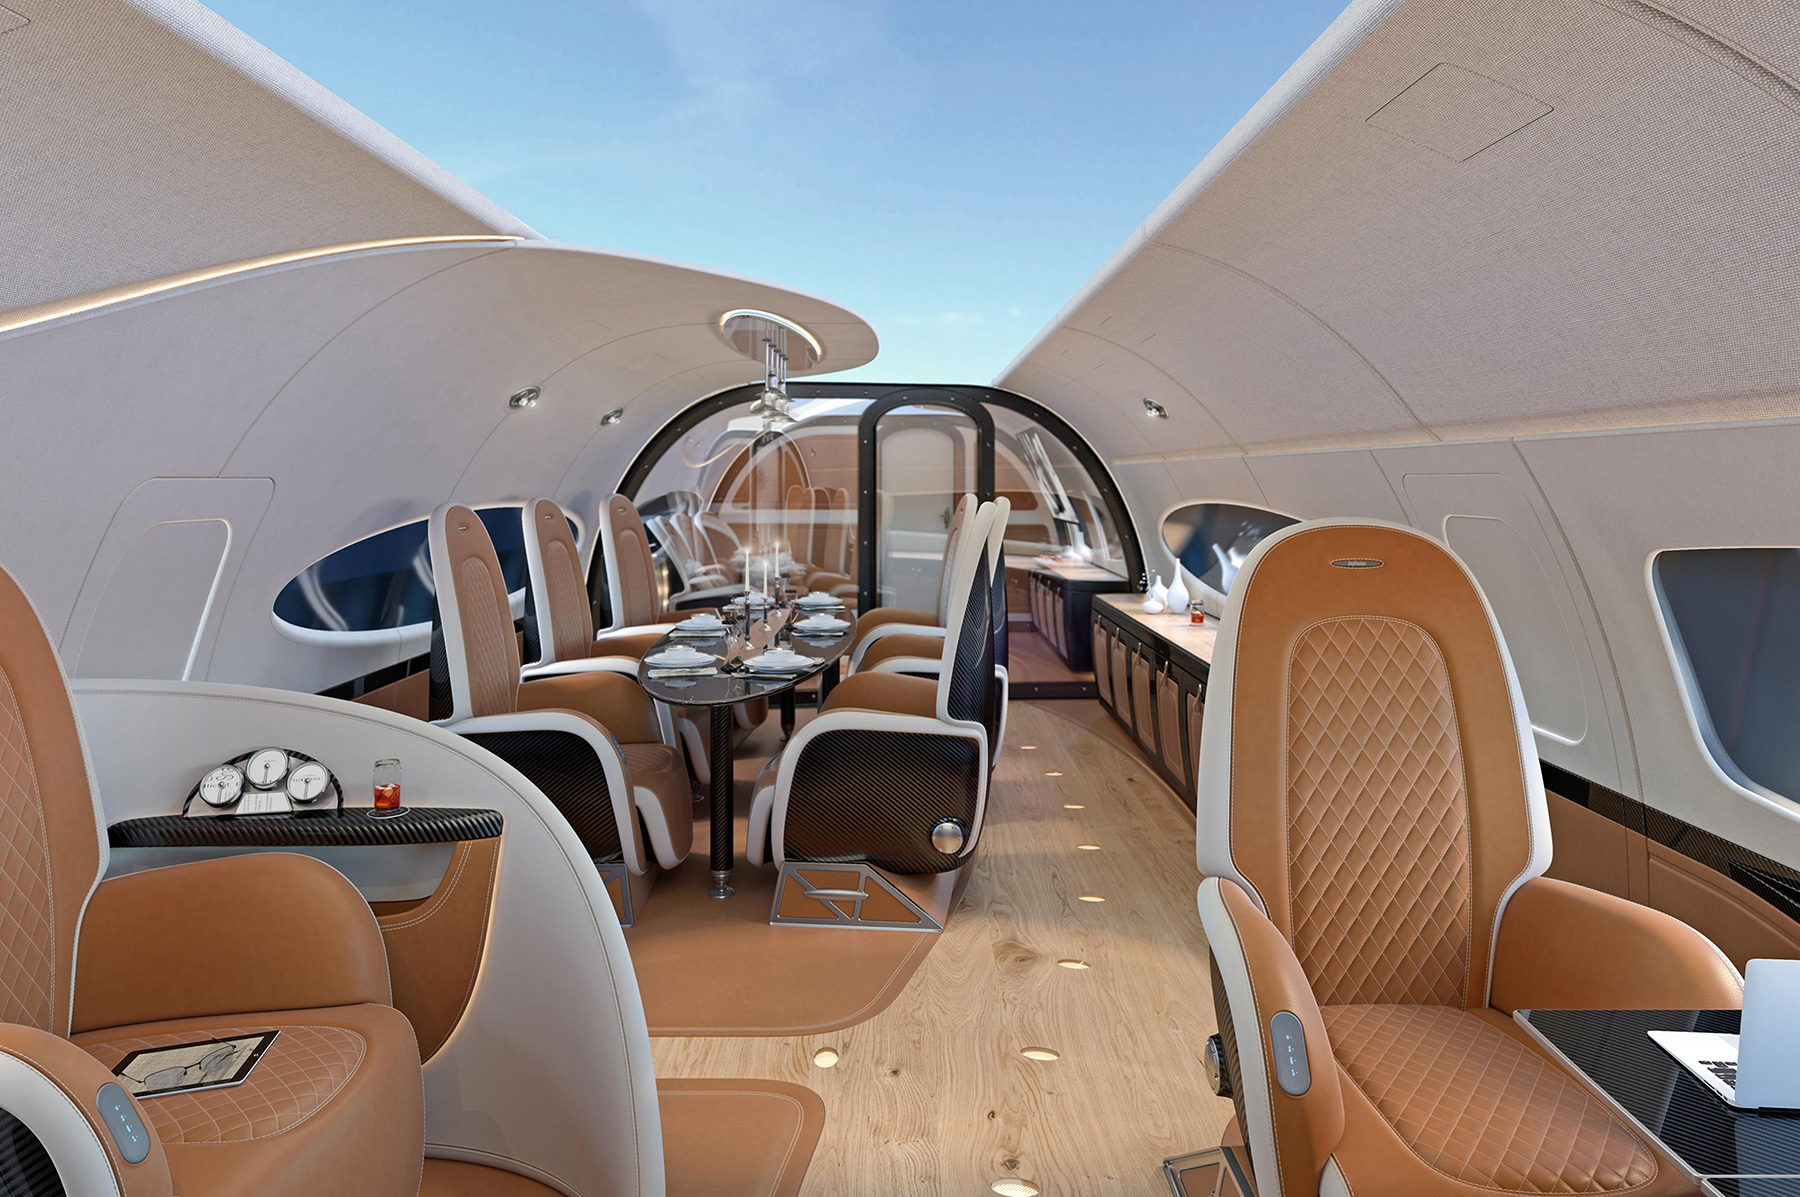 This Billionaire Business Jet Has Its Own Sunroof